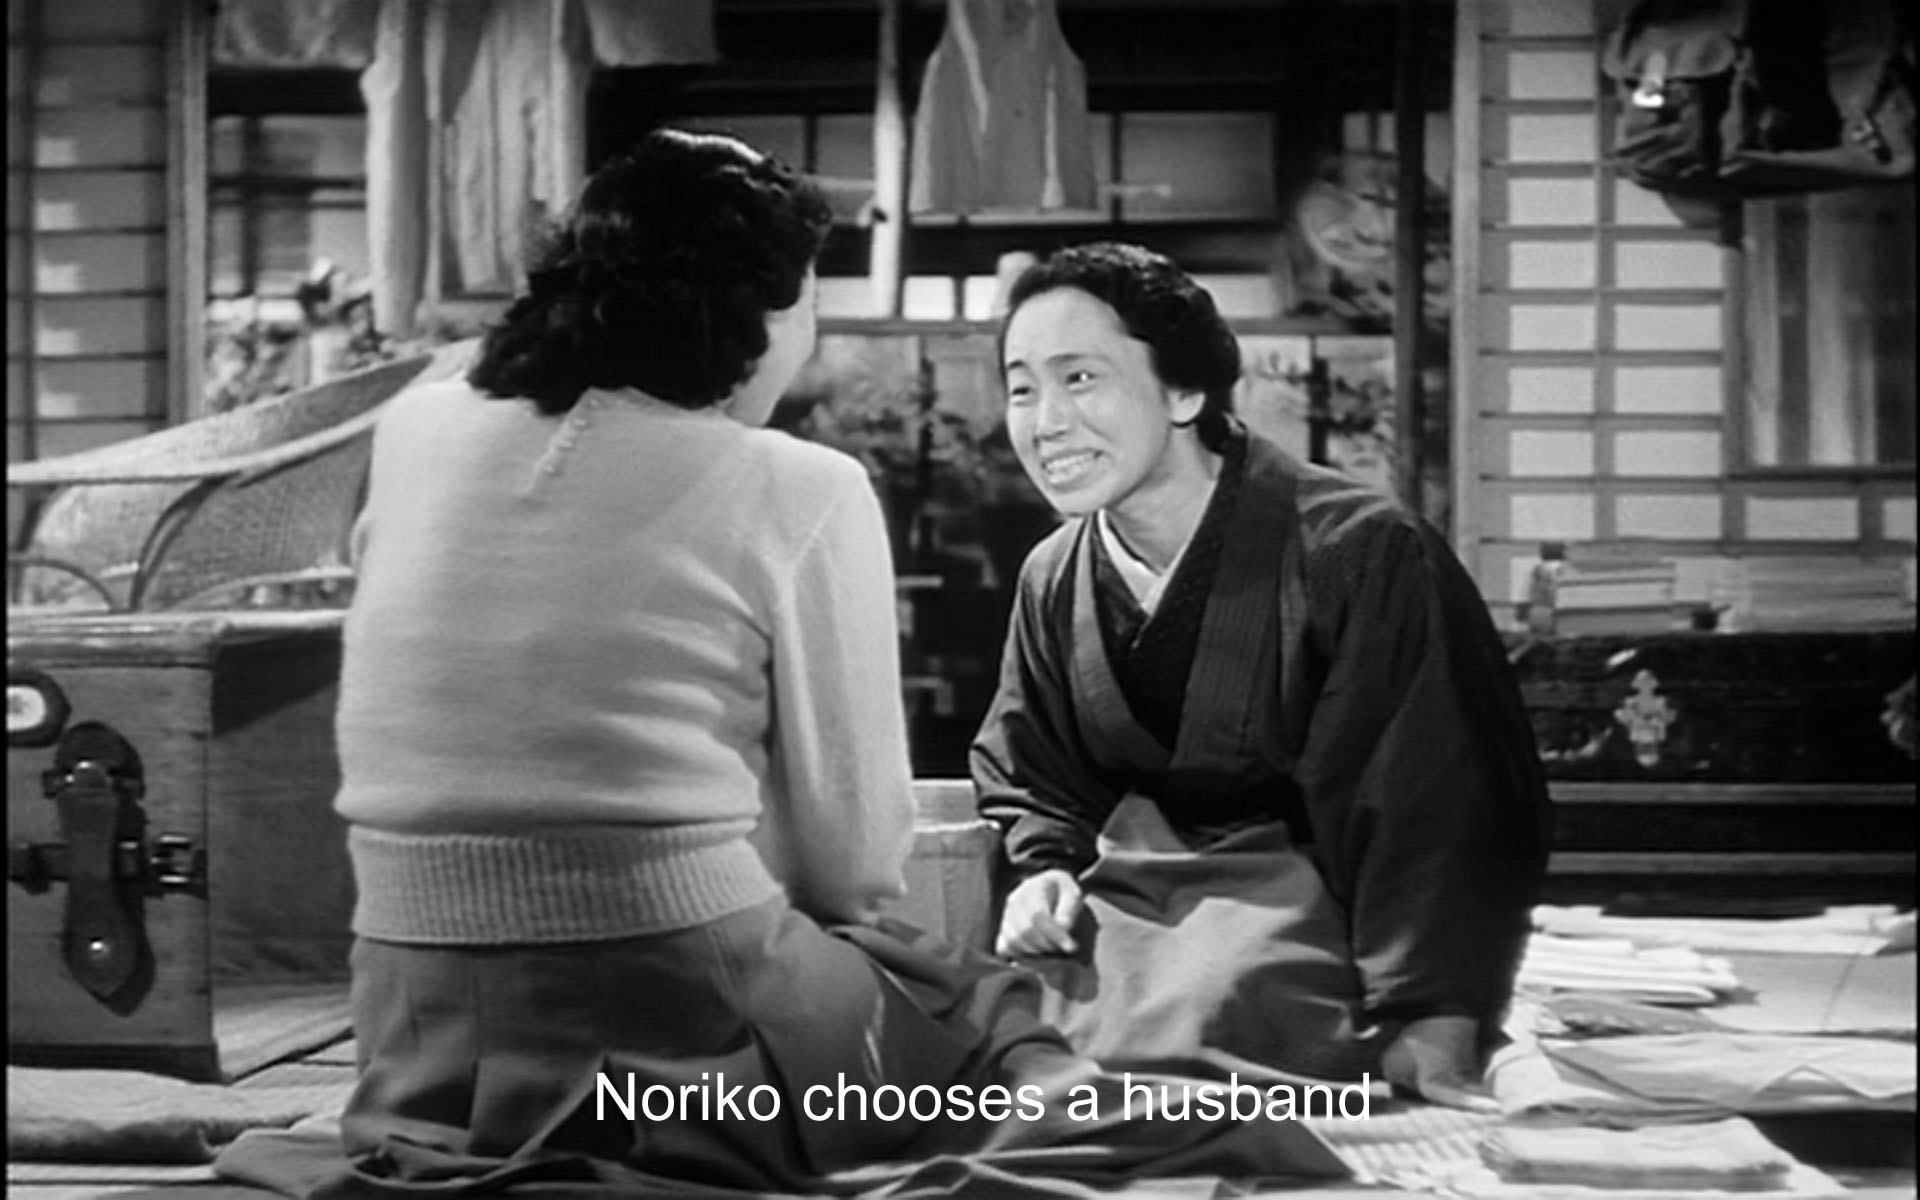 The moment of Noriko's choice